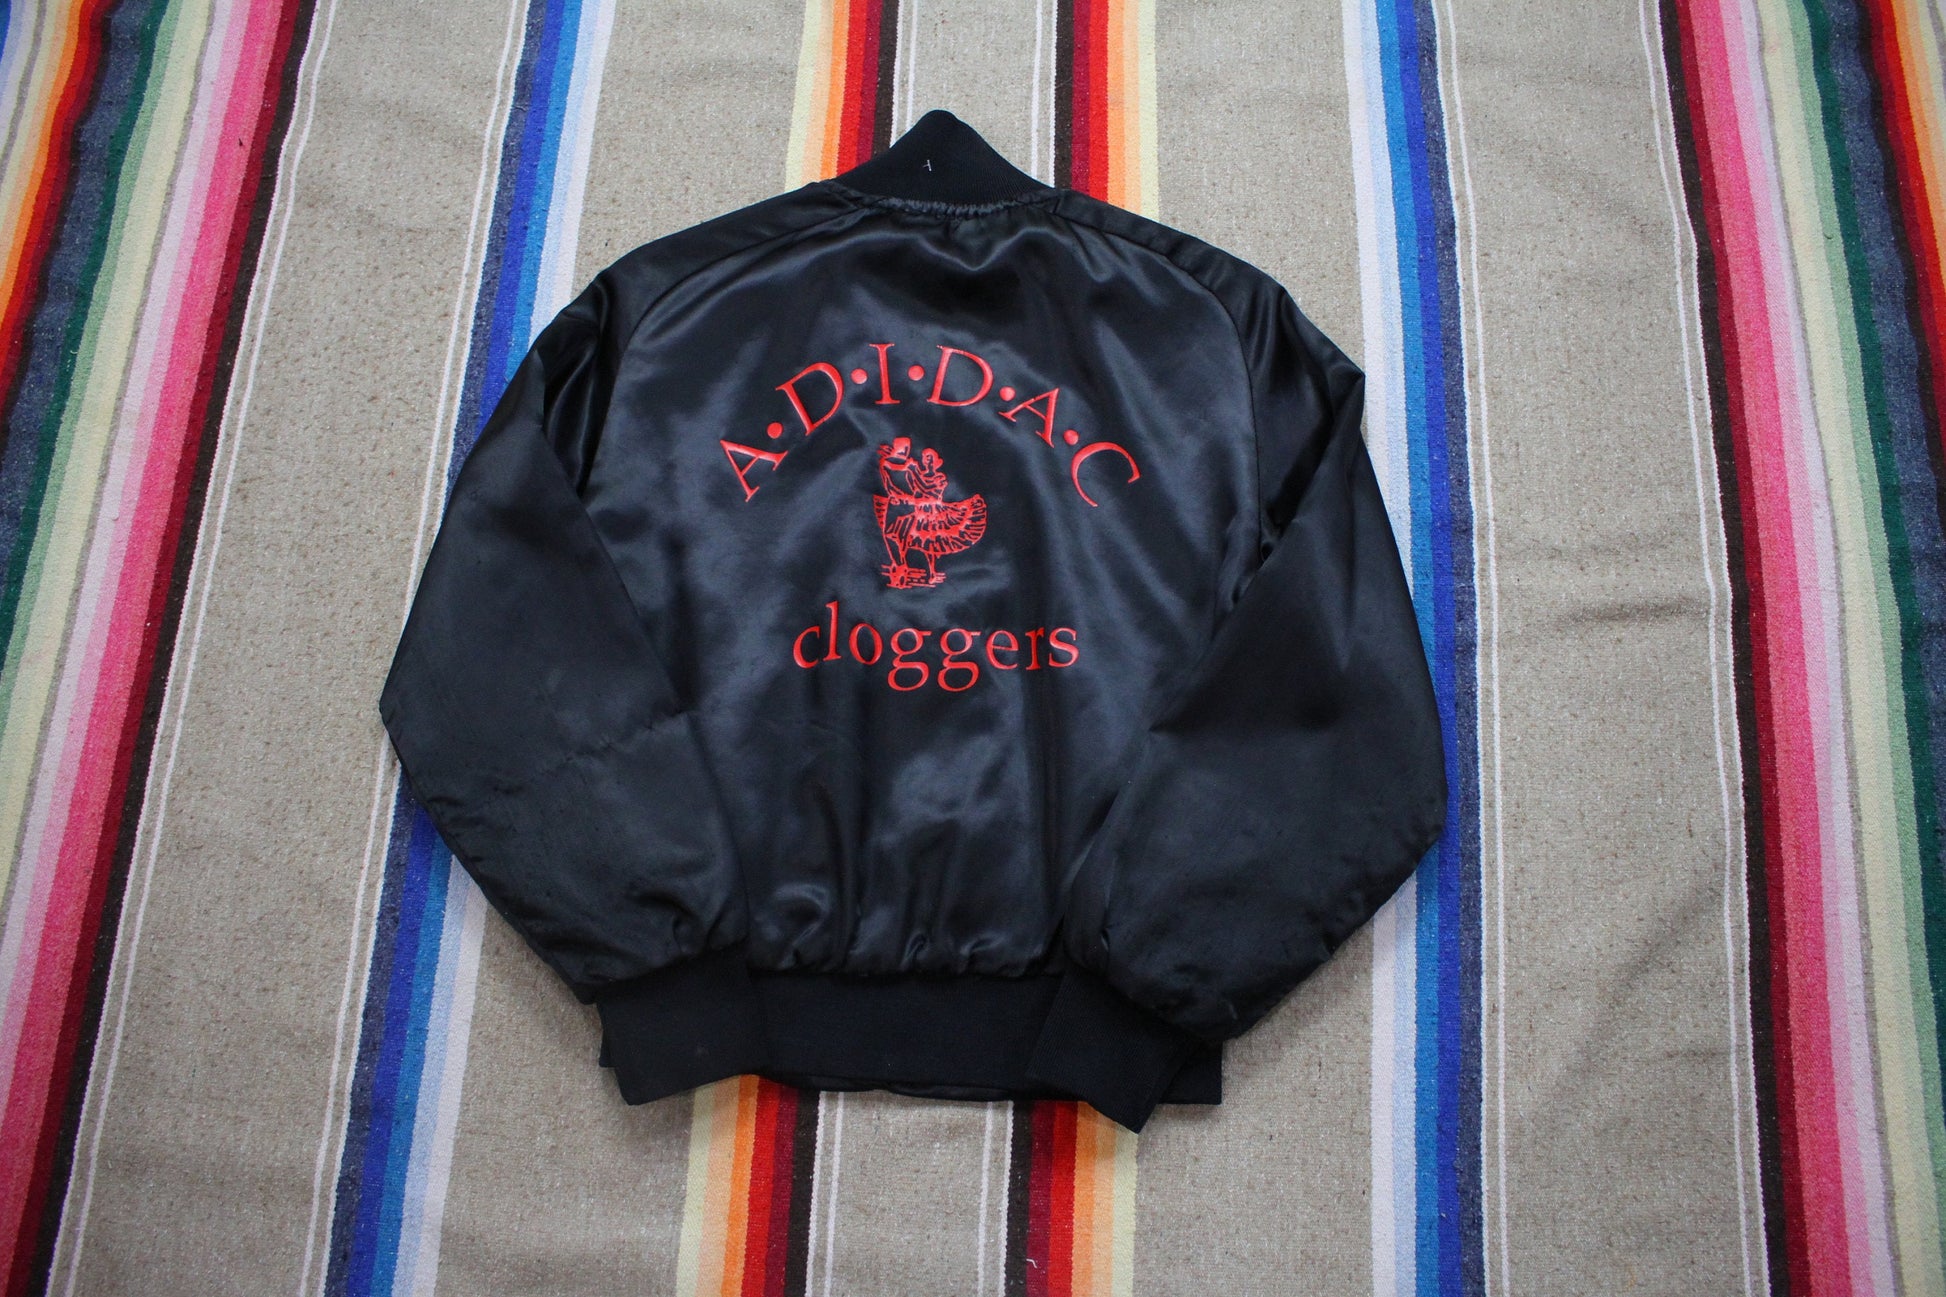 1980s West Wind ADIDAC Cloggers Satin Bomber Jacket Made in USA Women's Size L/XL